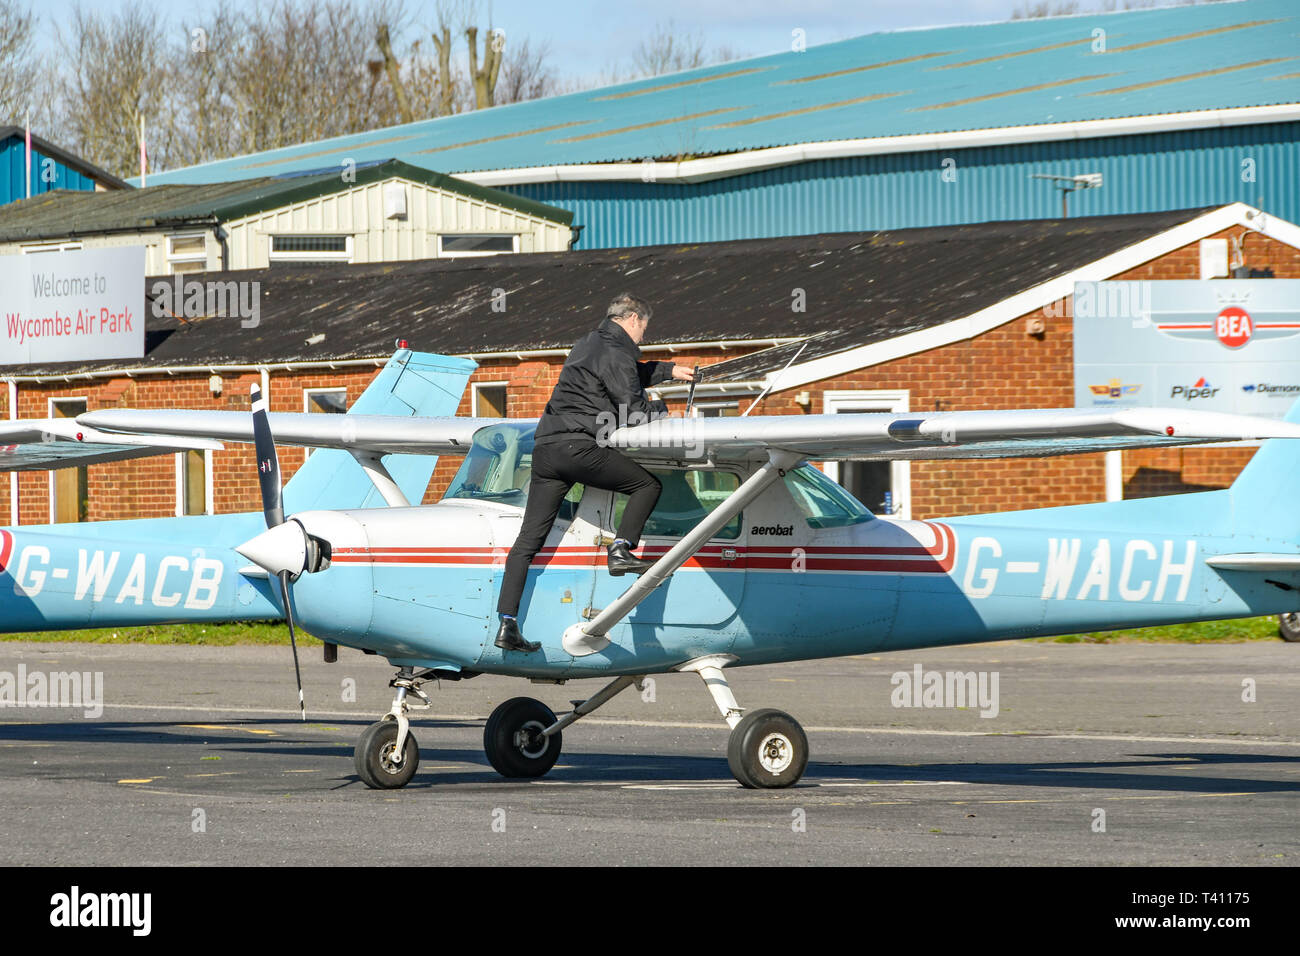 HIGH WYCOMBE, ENGLAND - MARCH 2019: Person checking the fuel tank pre flight on a Cessna Aerobat light trainer aircraft at Wycombe Air Park. Stock Photo